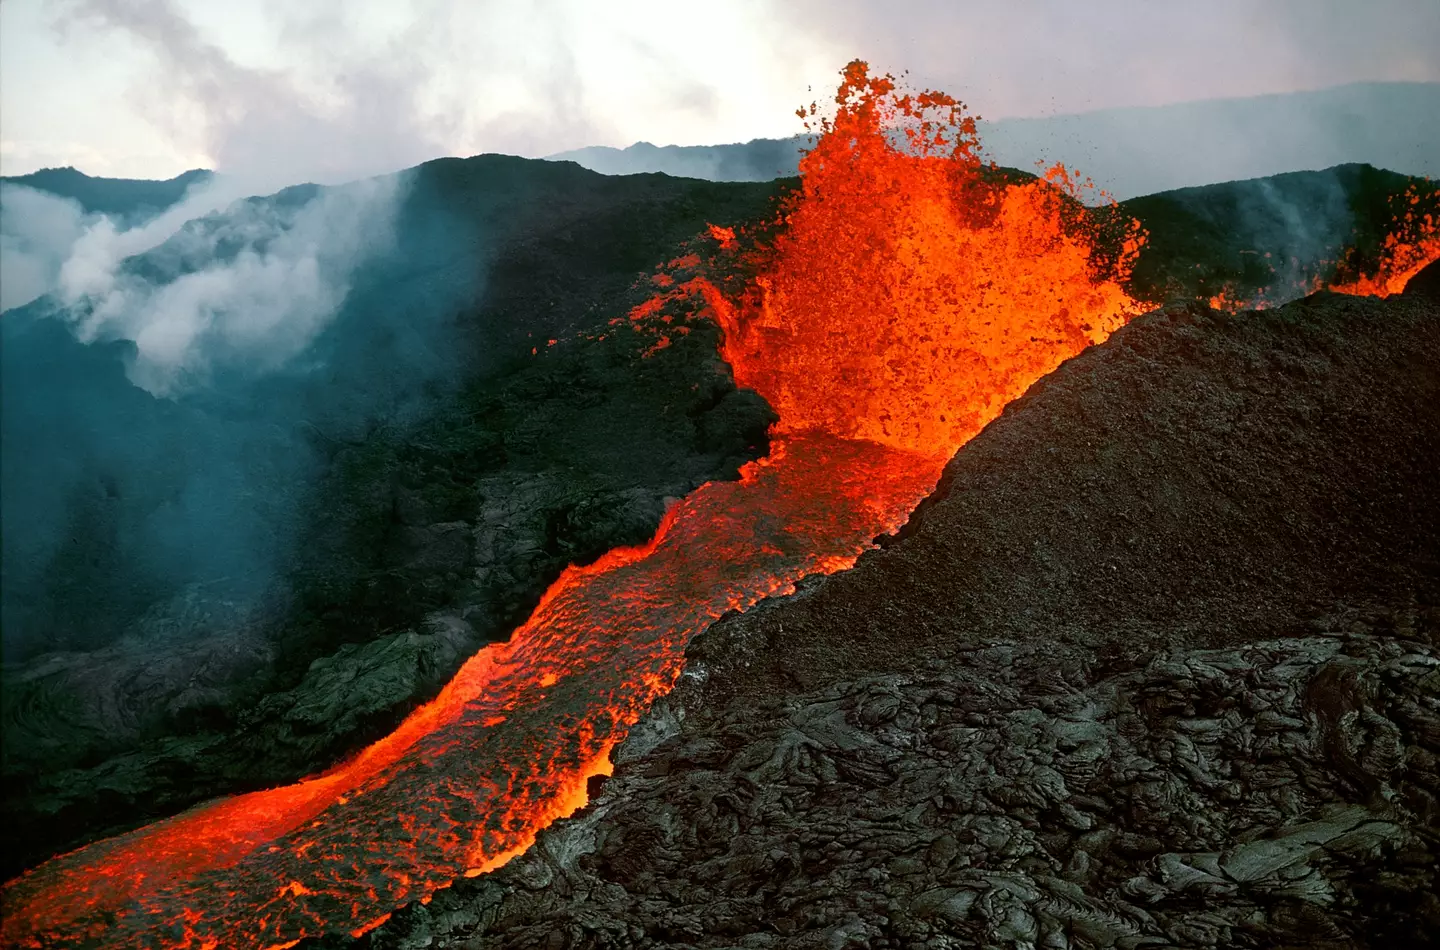 The volcano last erupted in 1984.